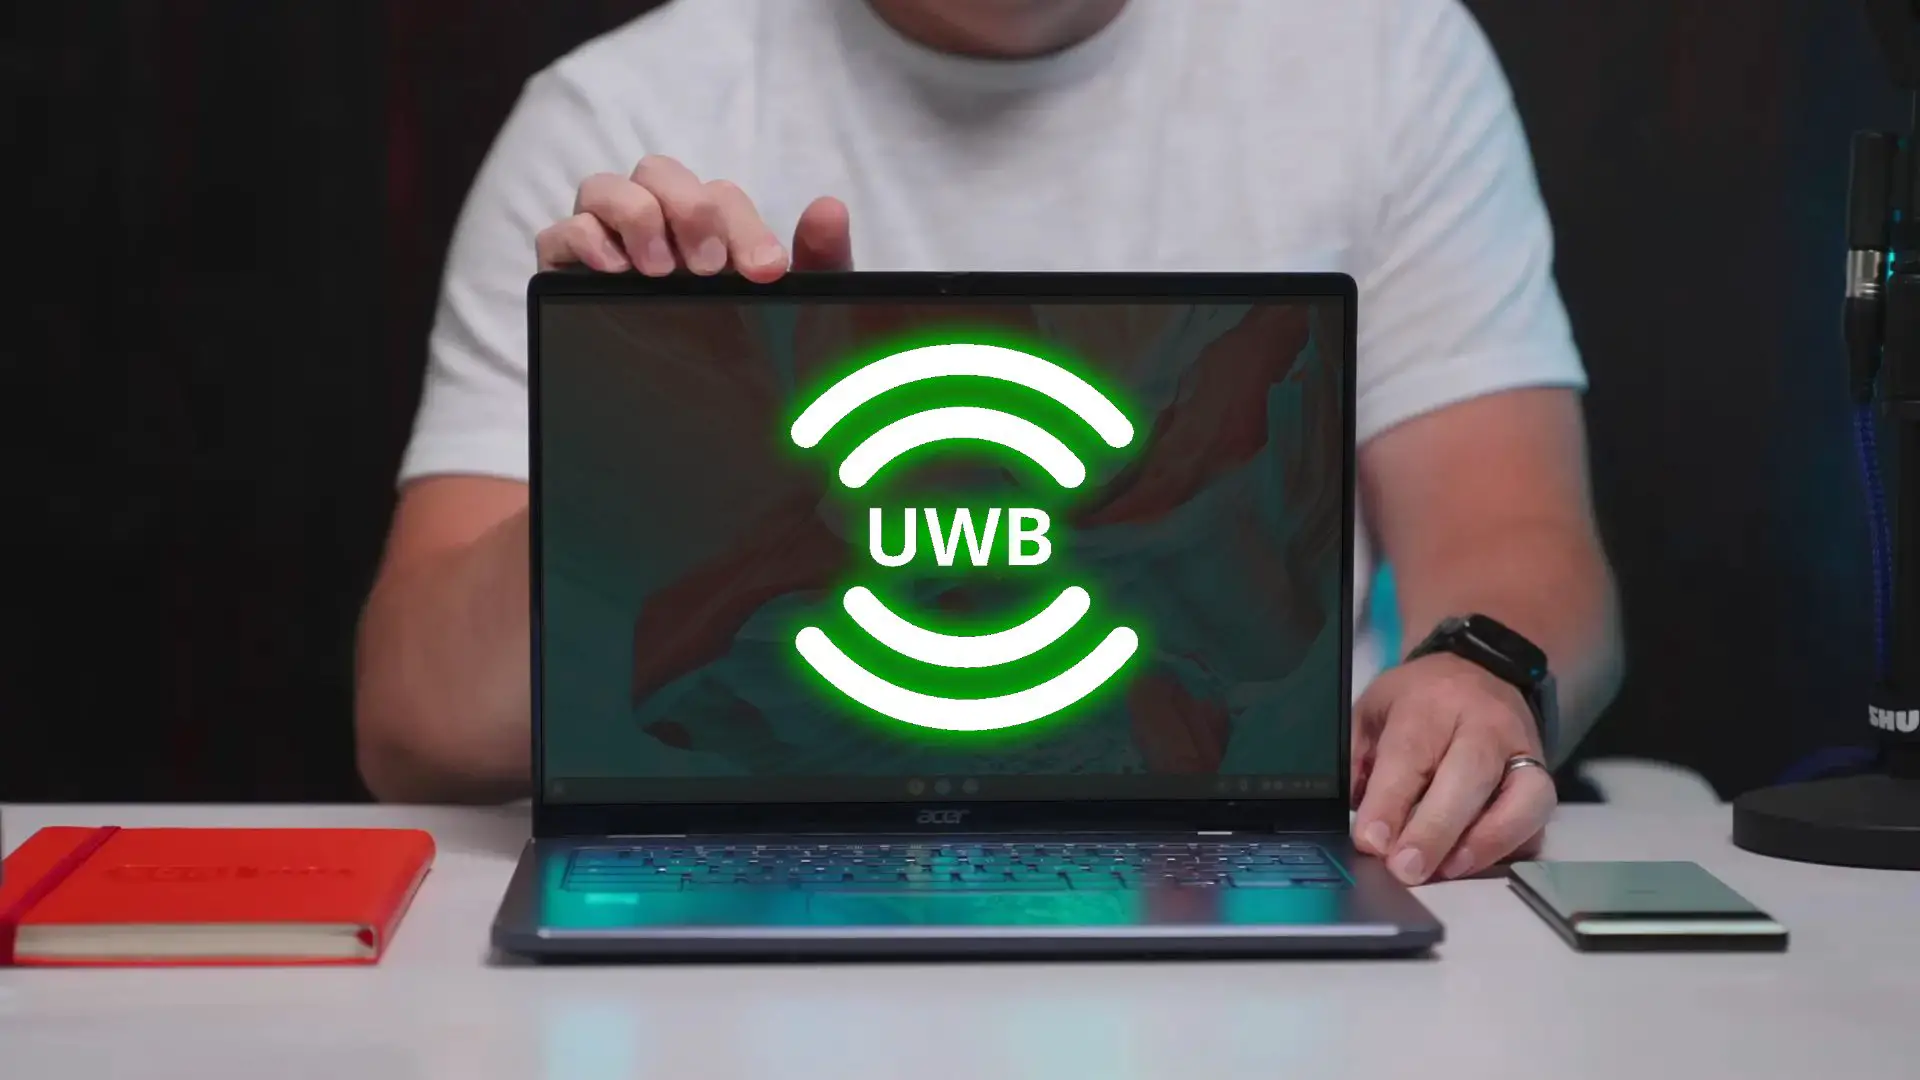 UWB (Ultra Wide Band) is coming to Chromebooks